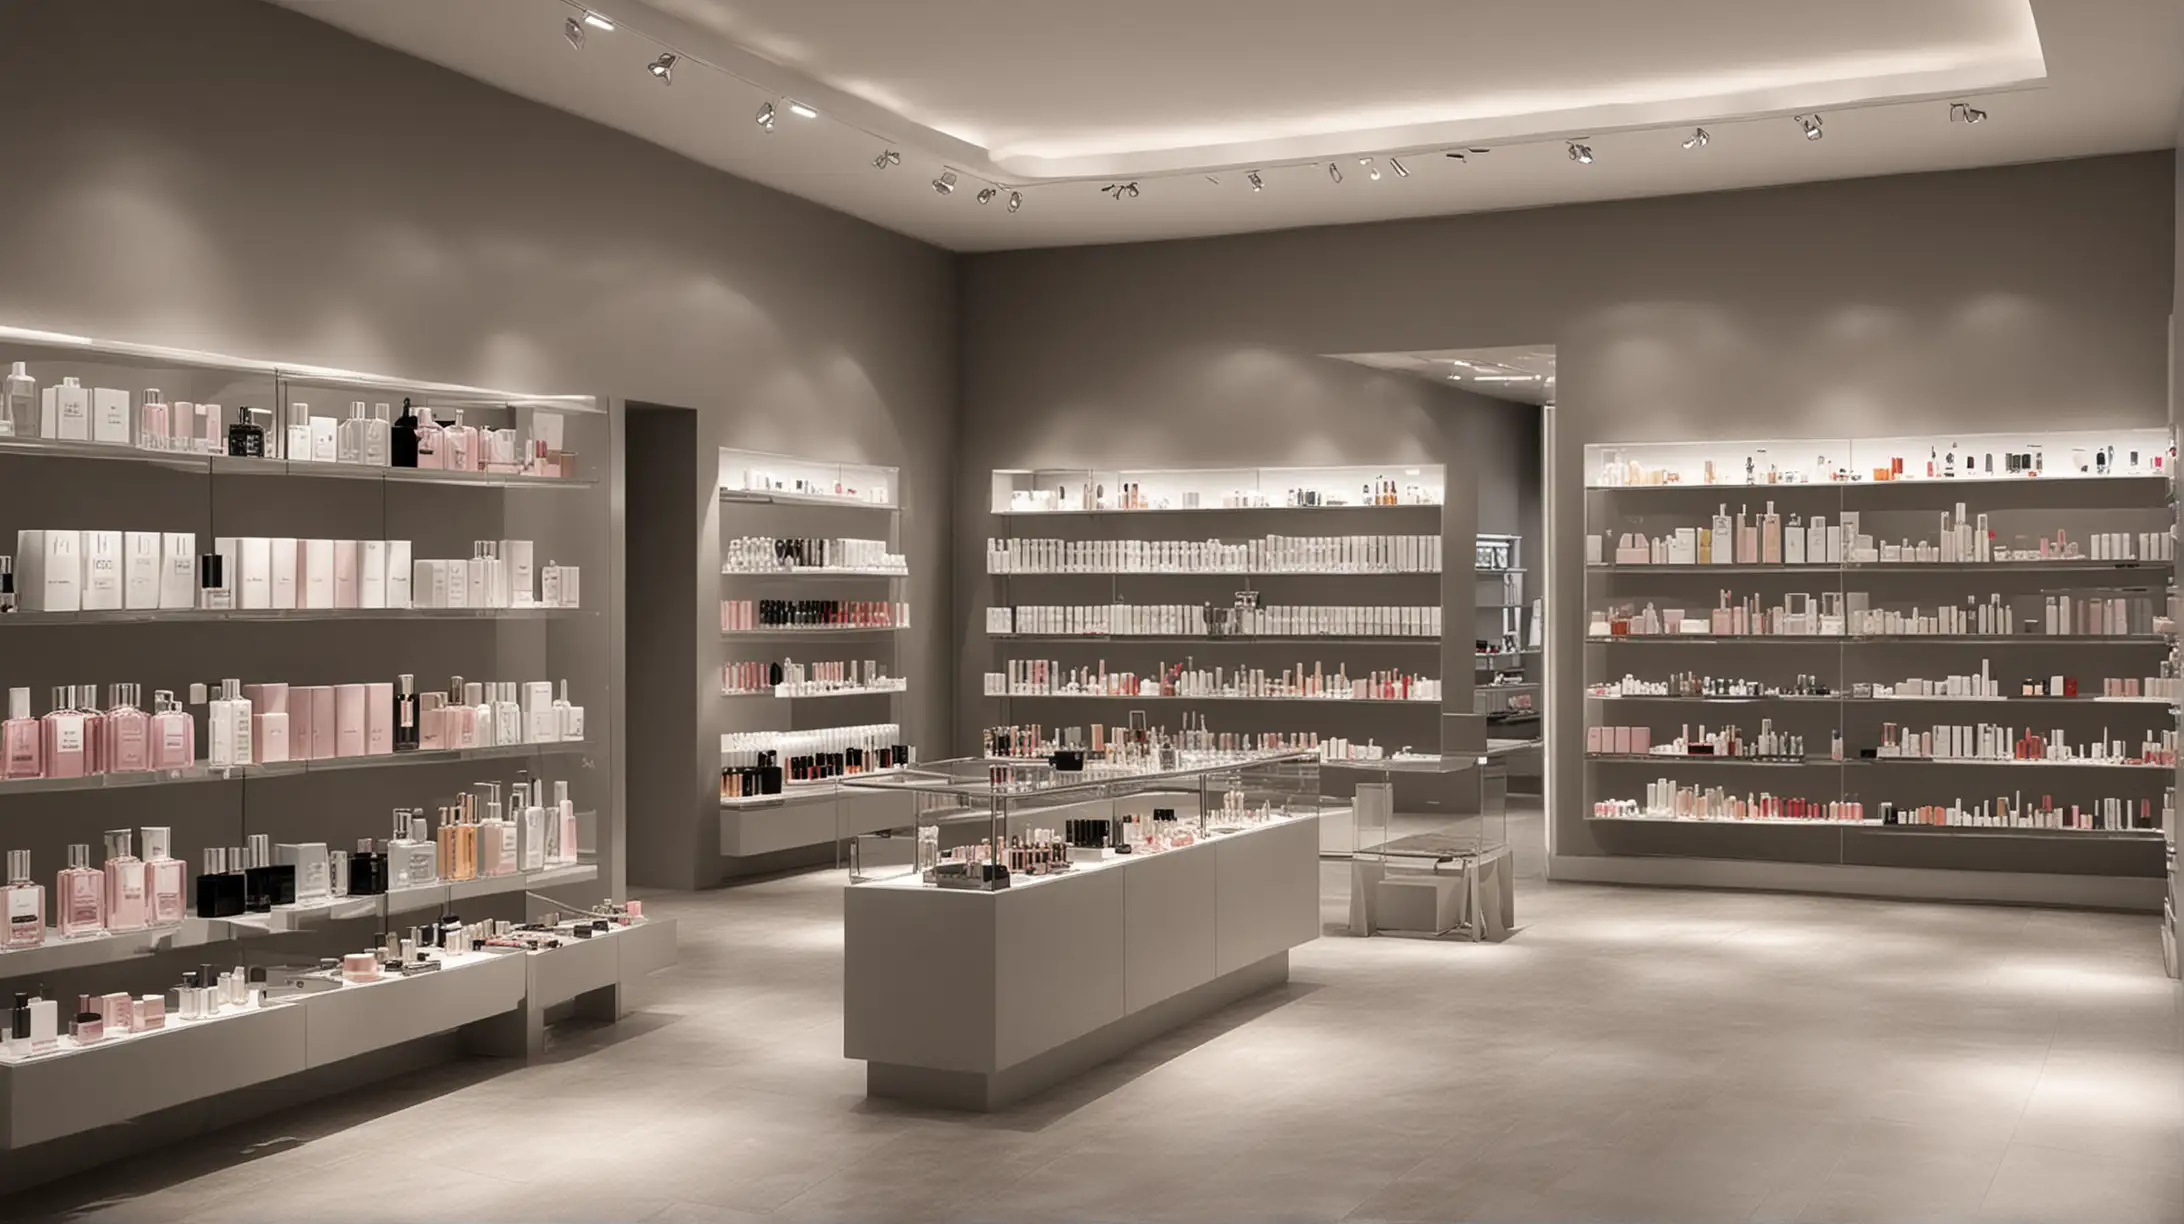 Contemporary Perfume Store Interior with Minimalist Design and Vibrant Colors